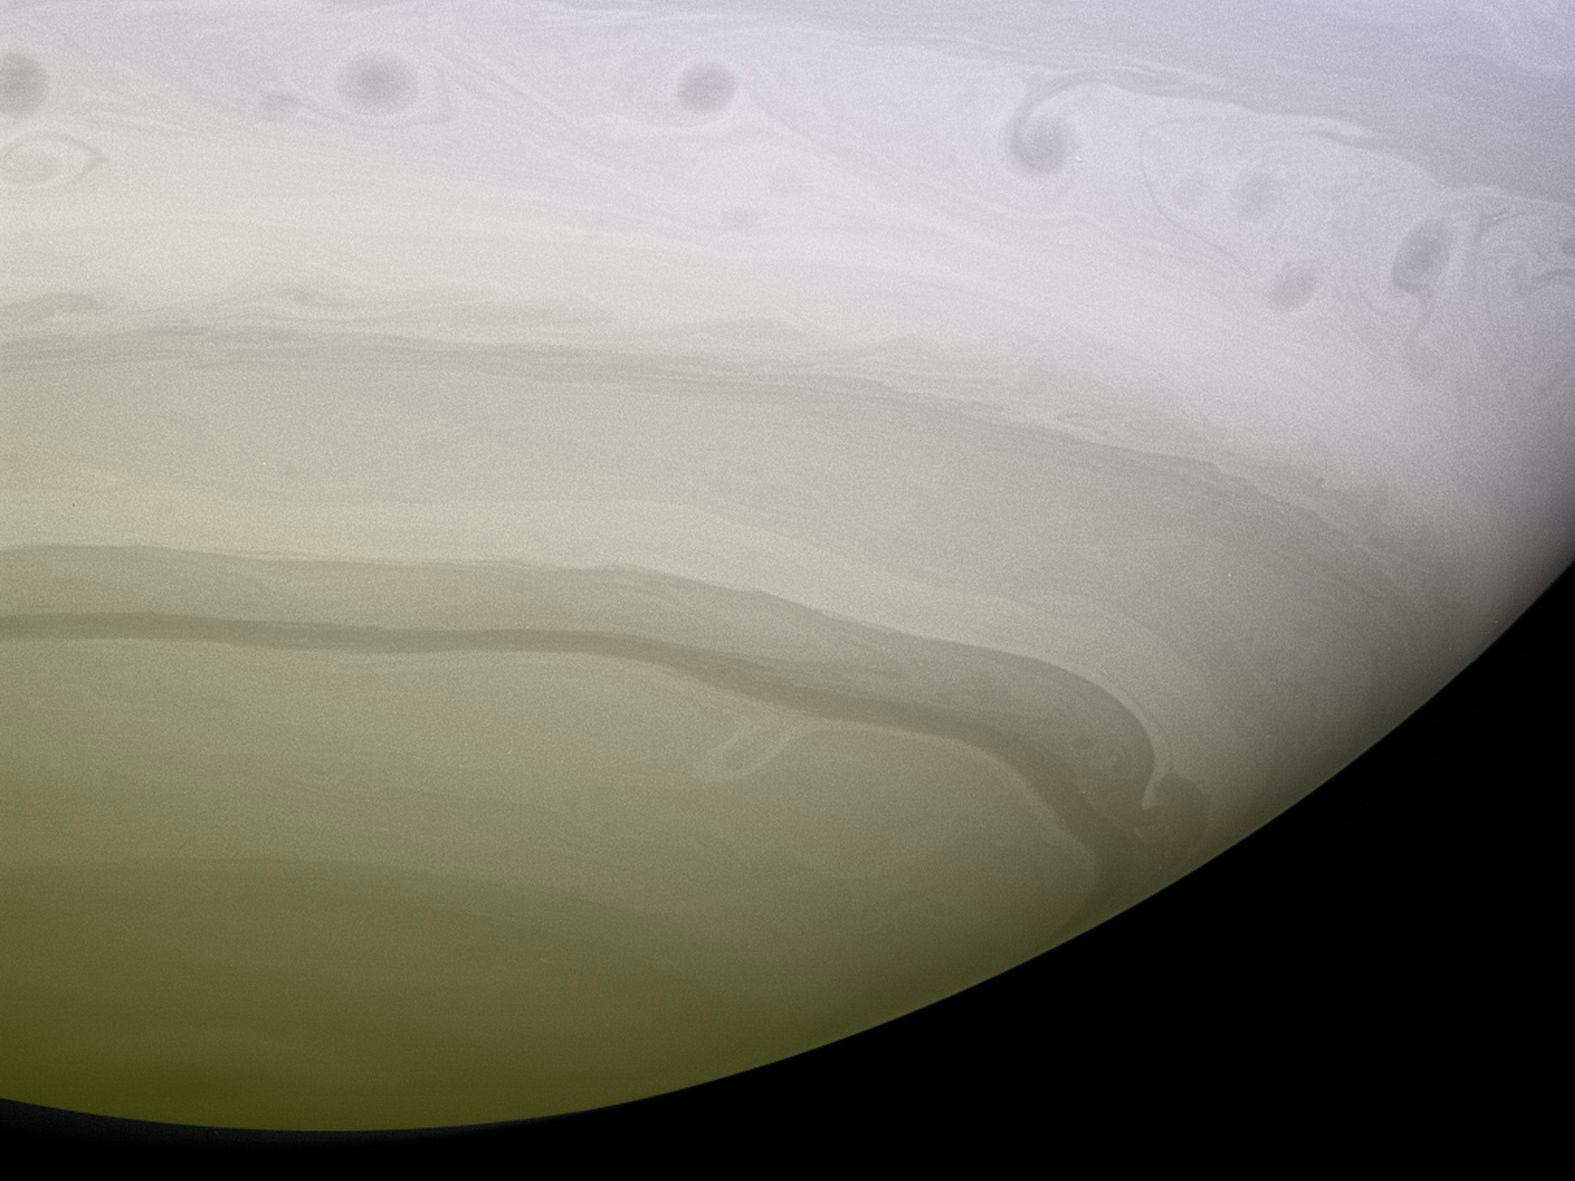 A detail from a Chromogenic print by Thomas Ruff, titled cassini 23, dated 2009.